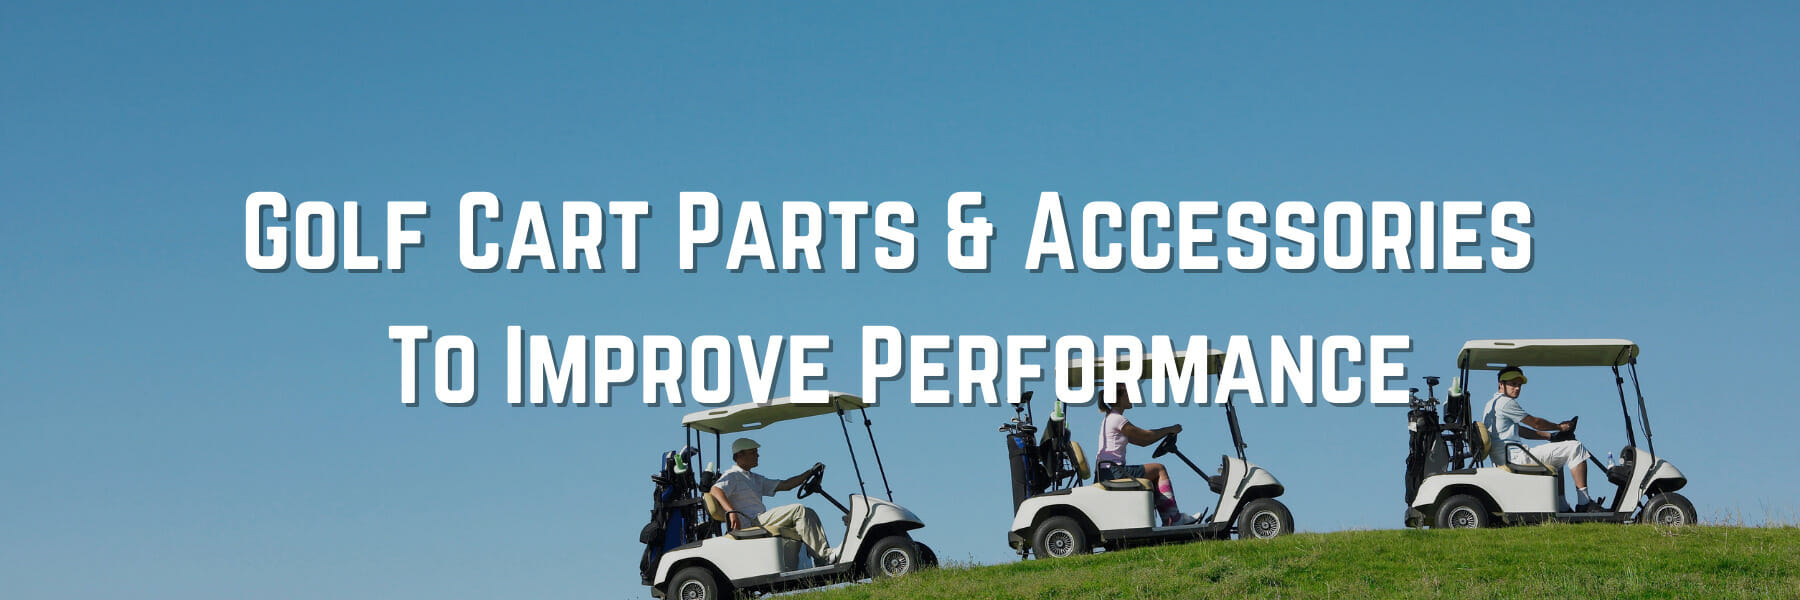 Golf Cart Parts & Accessories To Improve Performance